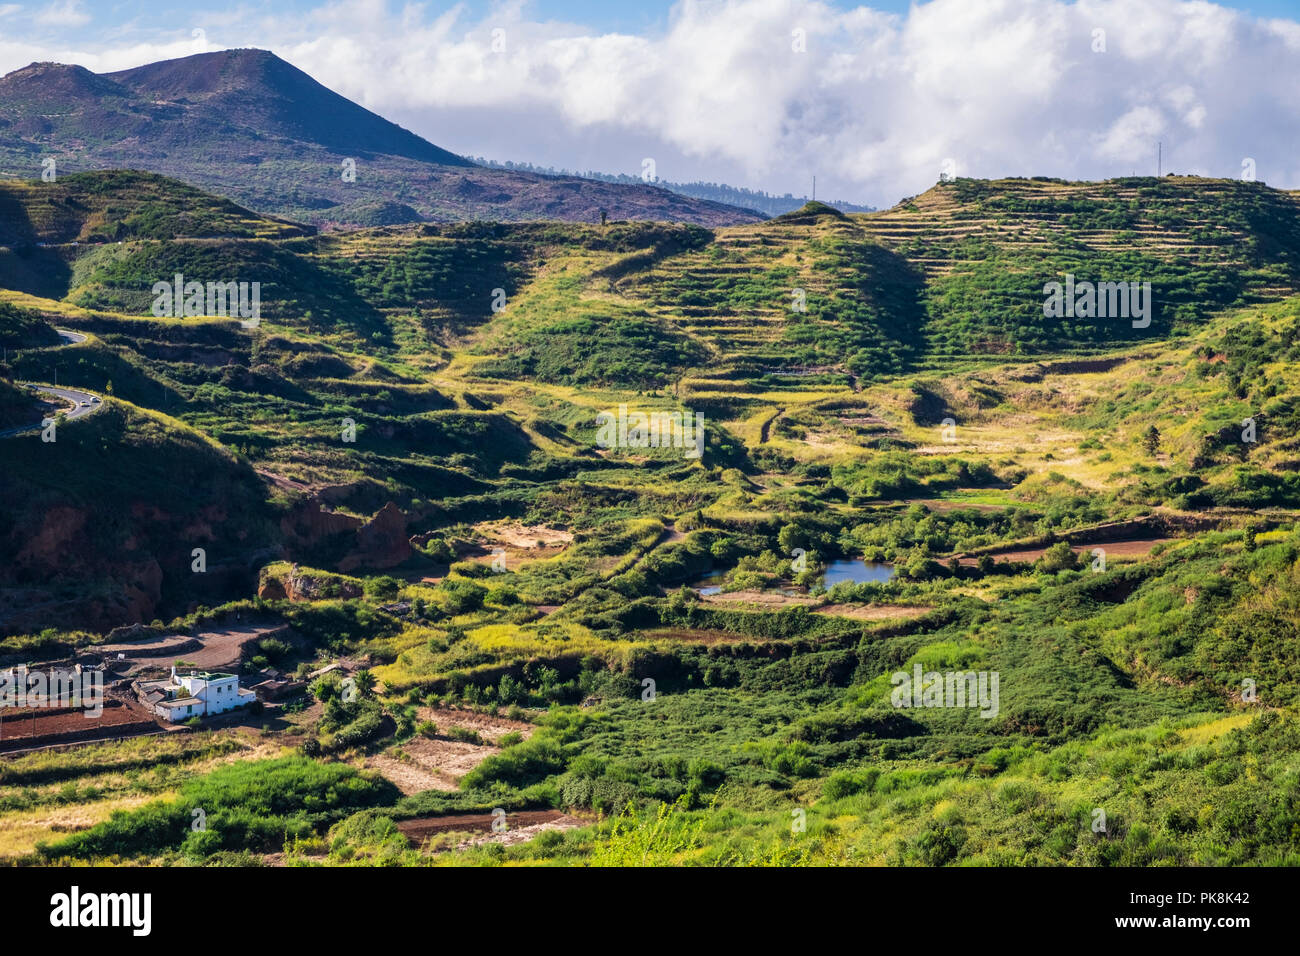 Views over the ponds at  Erjos from a walking route on the ridge above, Teno, Tenerife, Canary Islands, Spain Stock Photo